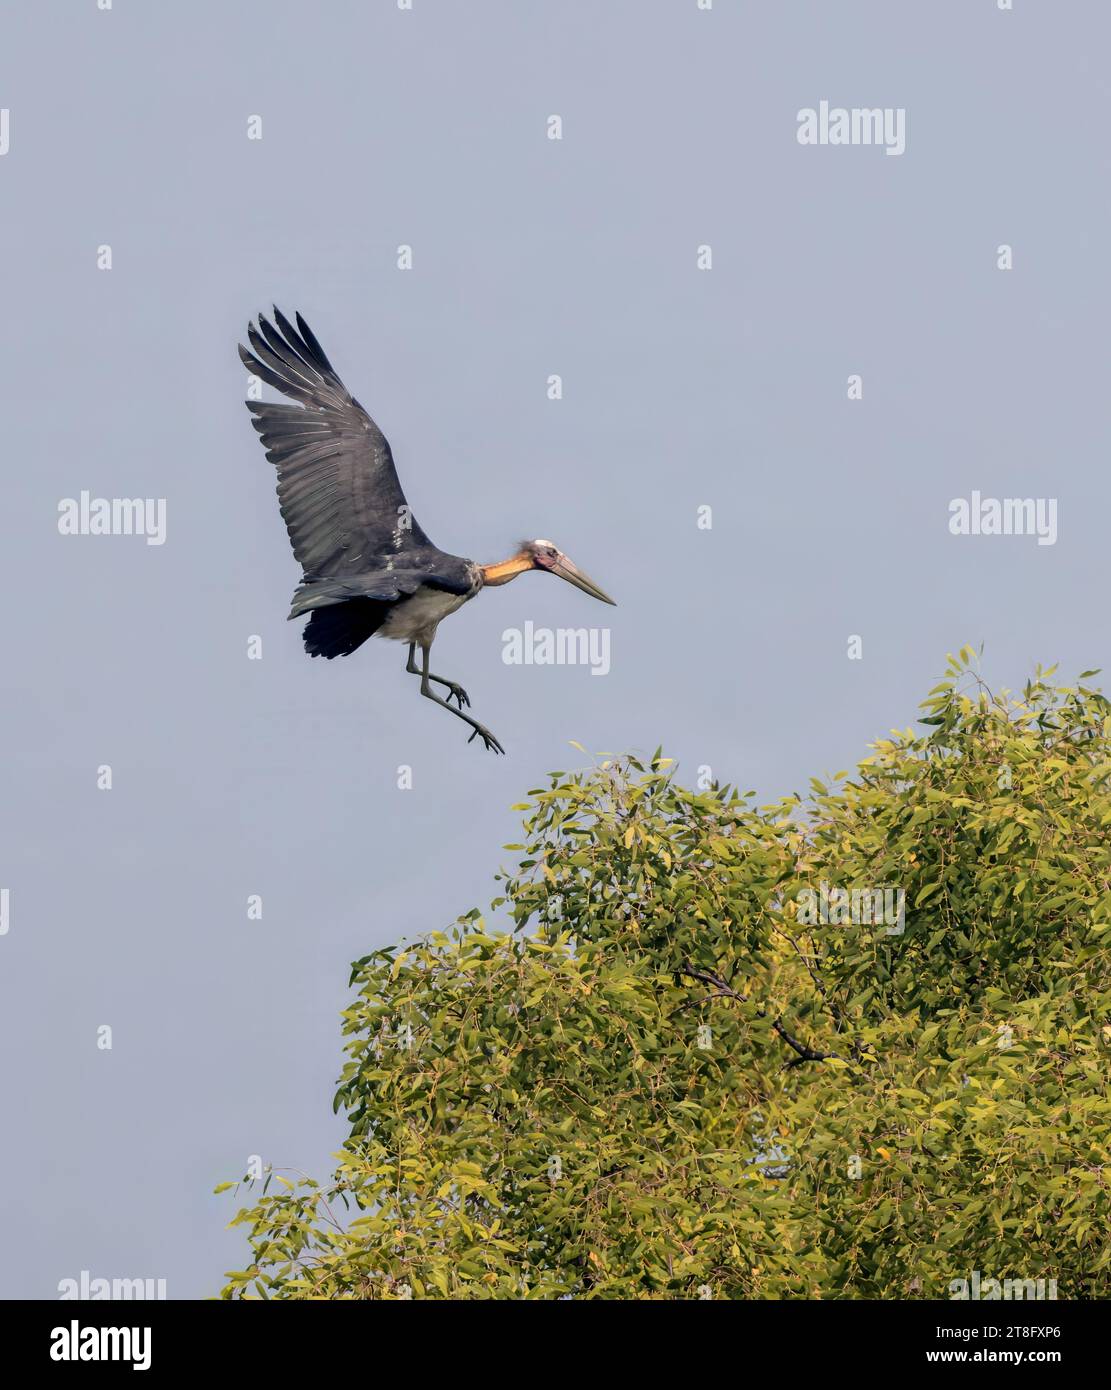 lesser adjutant is a large wading bird in the stork family Ciconiidae. this photo was taken from Sundarbans National Park,Bangladesh. Stock Photo